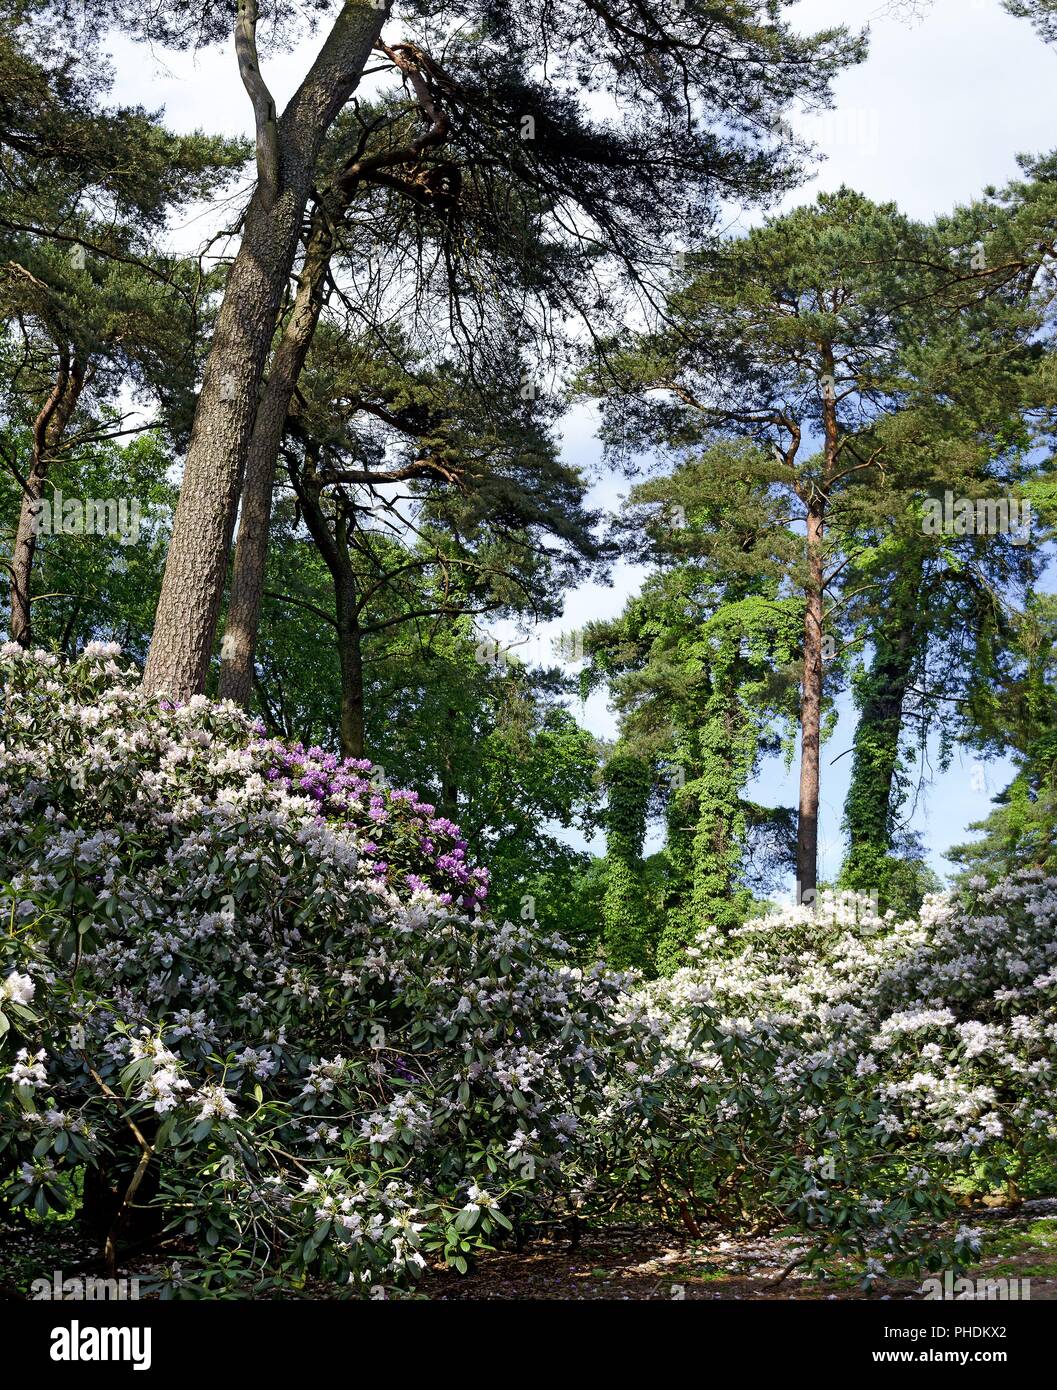 pines and bushes of rhododendrons Stock Photo